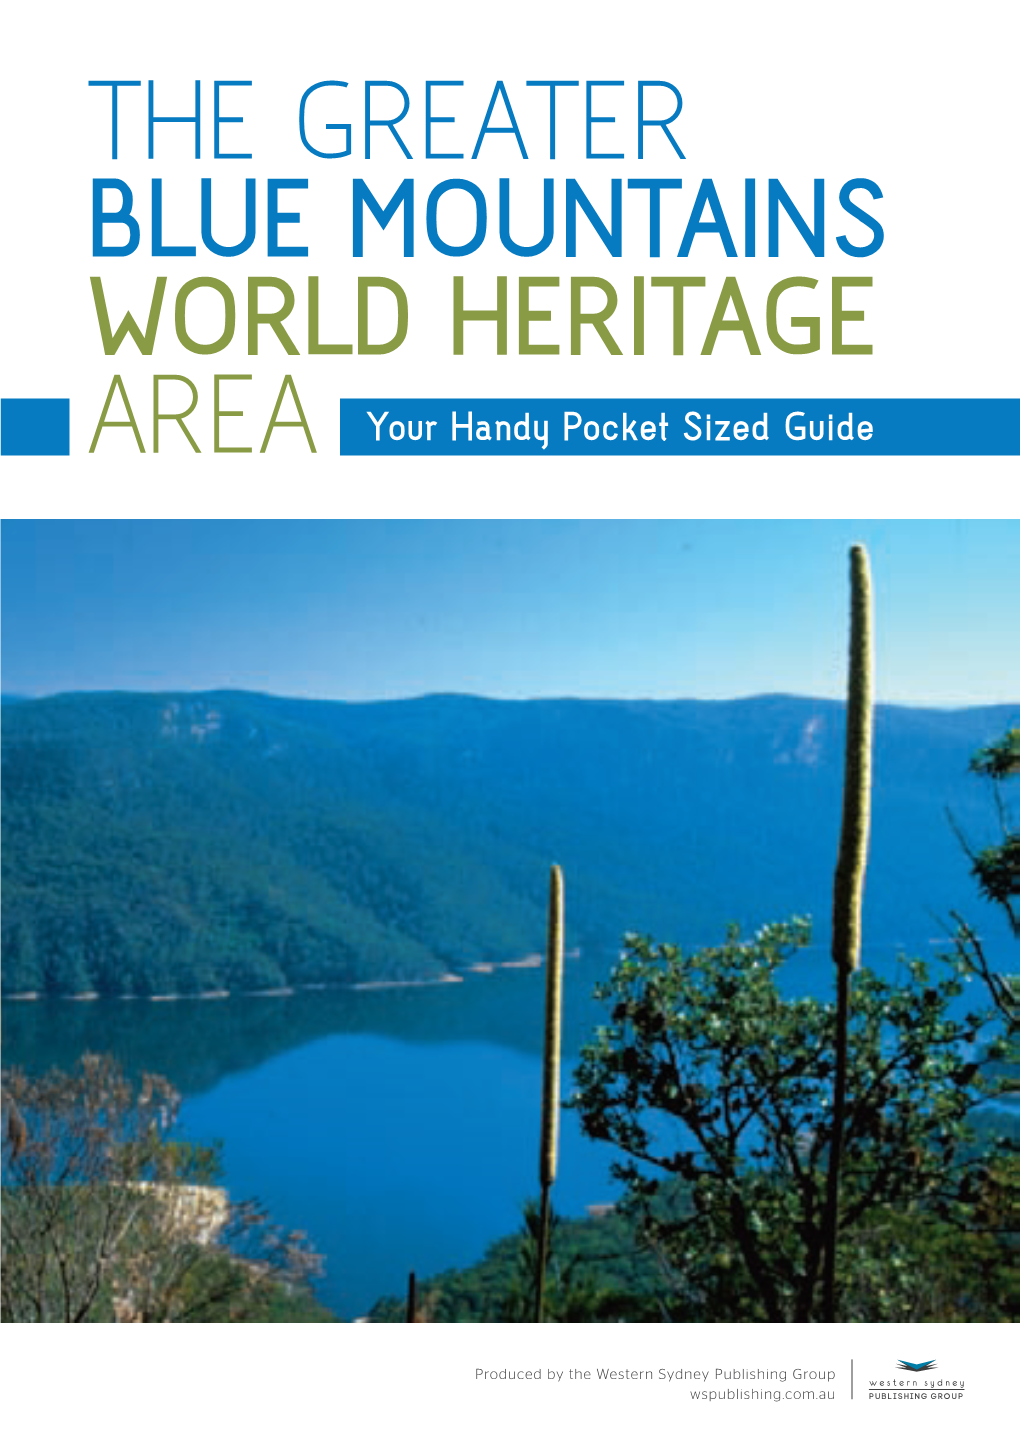 THE GREATER BLUE MOUNTAINS WORLD HERITAGE AREA Your Handy Pocket Sized Guide